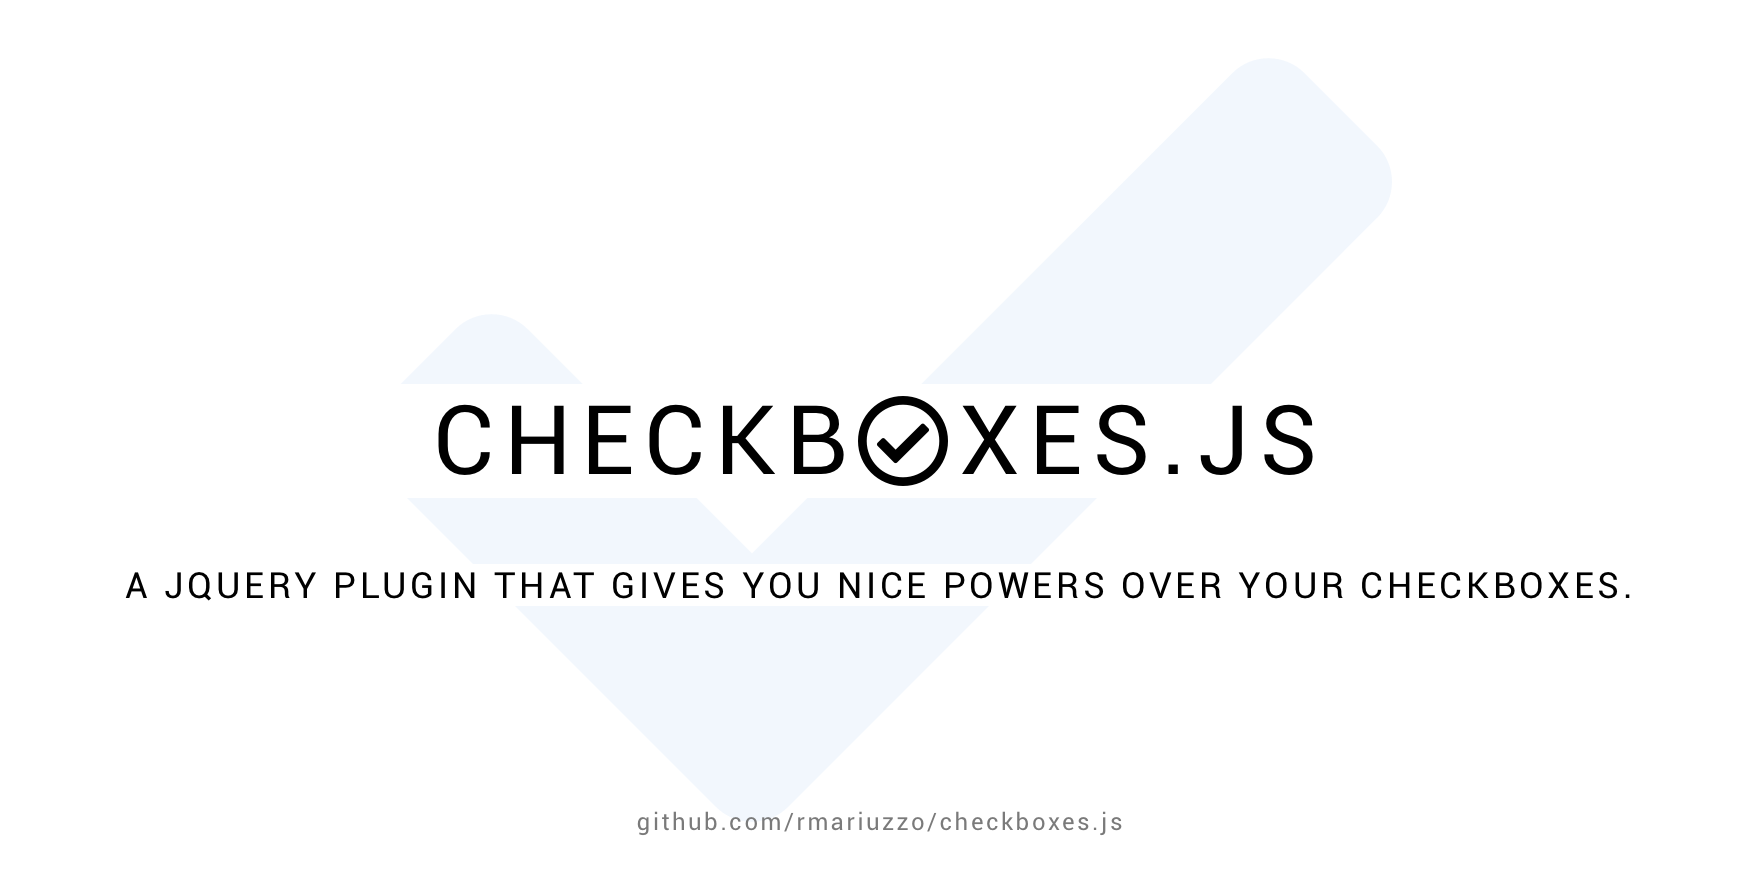 checkboxes.js – A jQuery plugin that gives you nice powers over your checkboxes